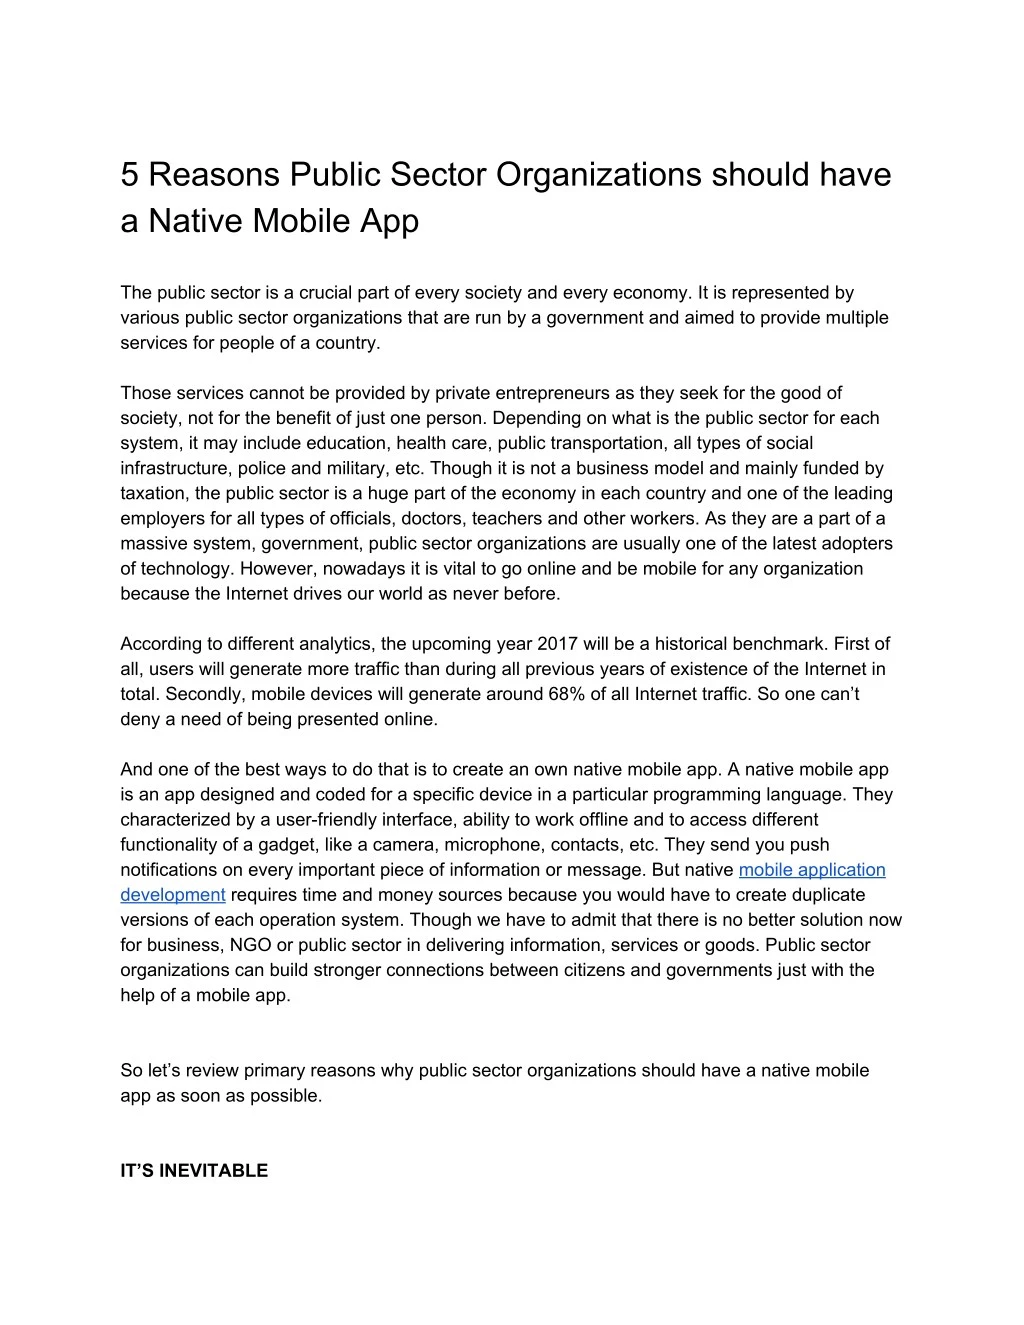 5 reasons public sector organizations should have